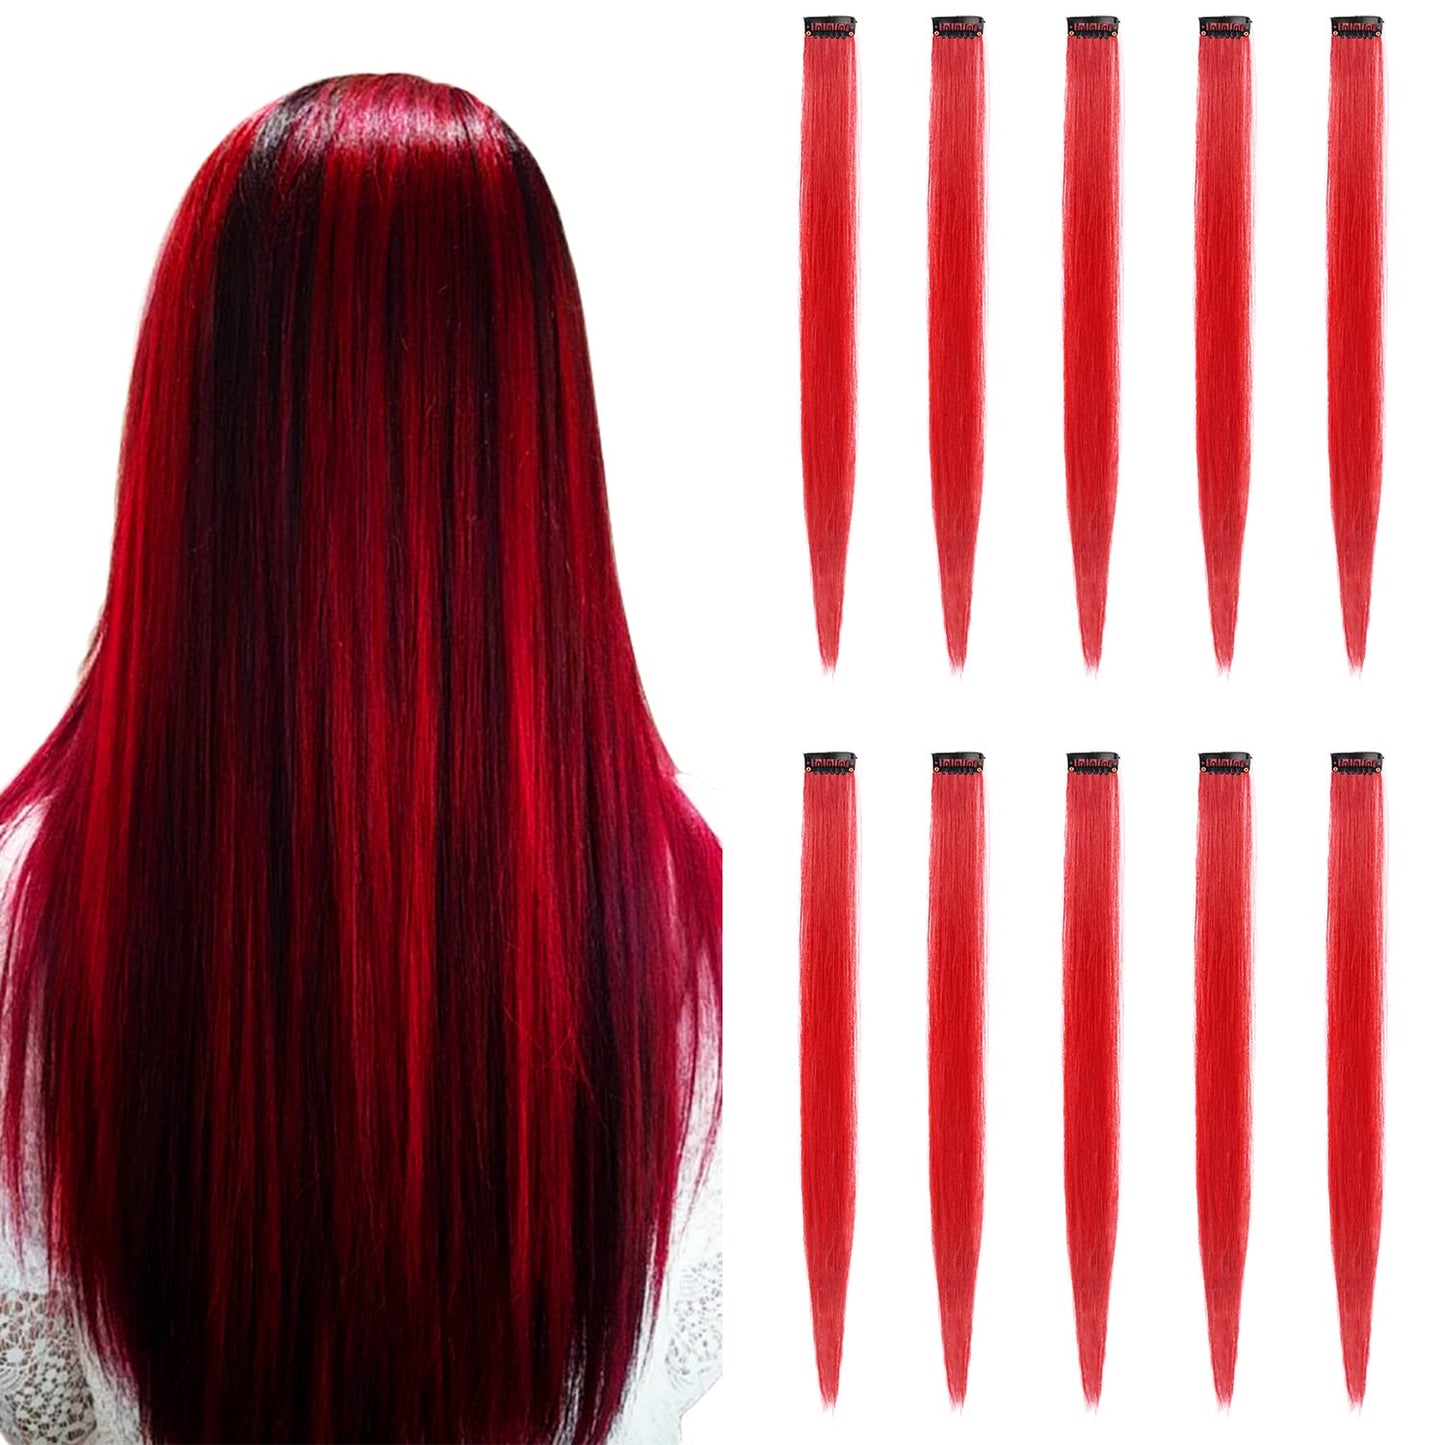 22 Inch Colored Hair Extensions (10 PCS Red)